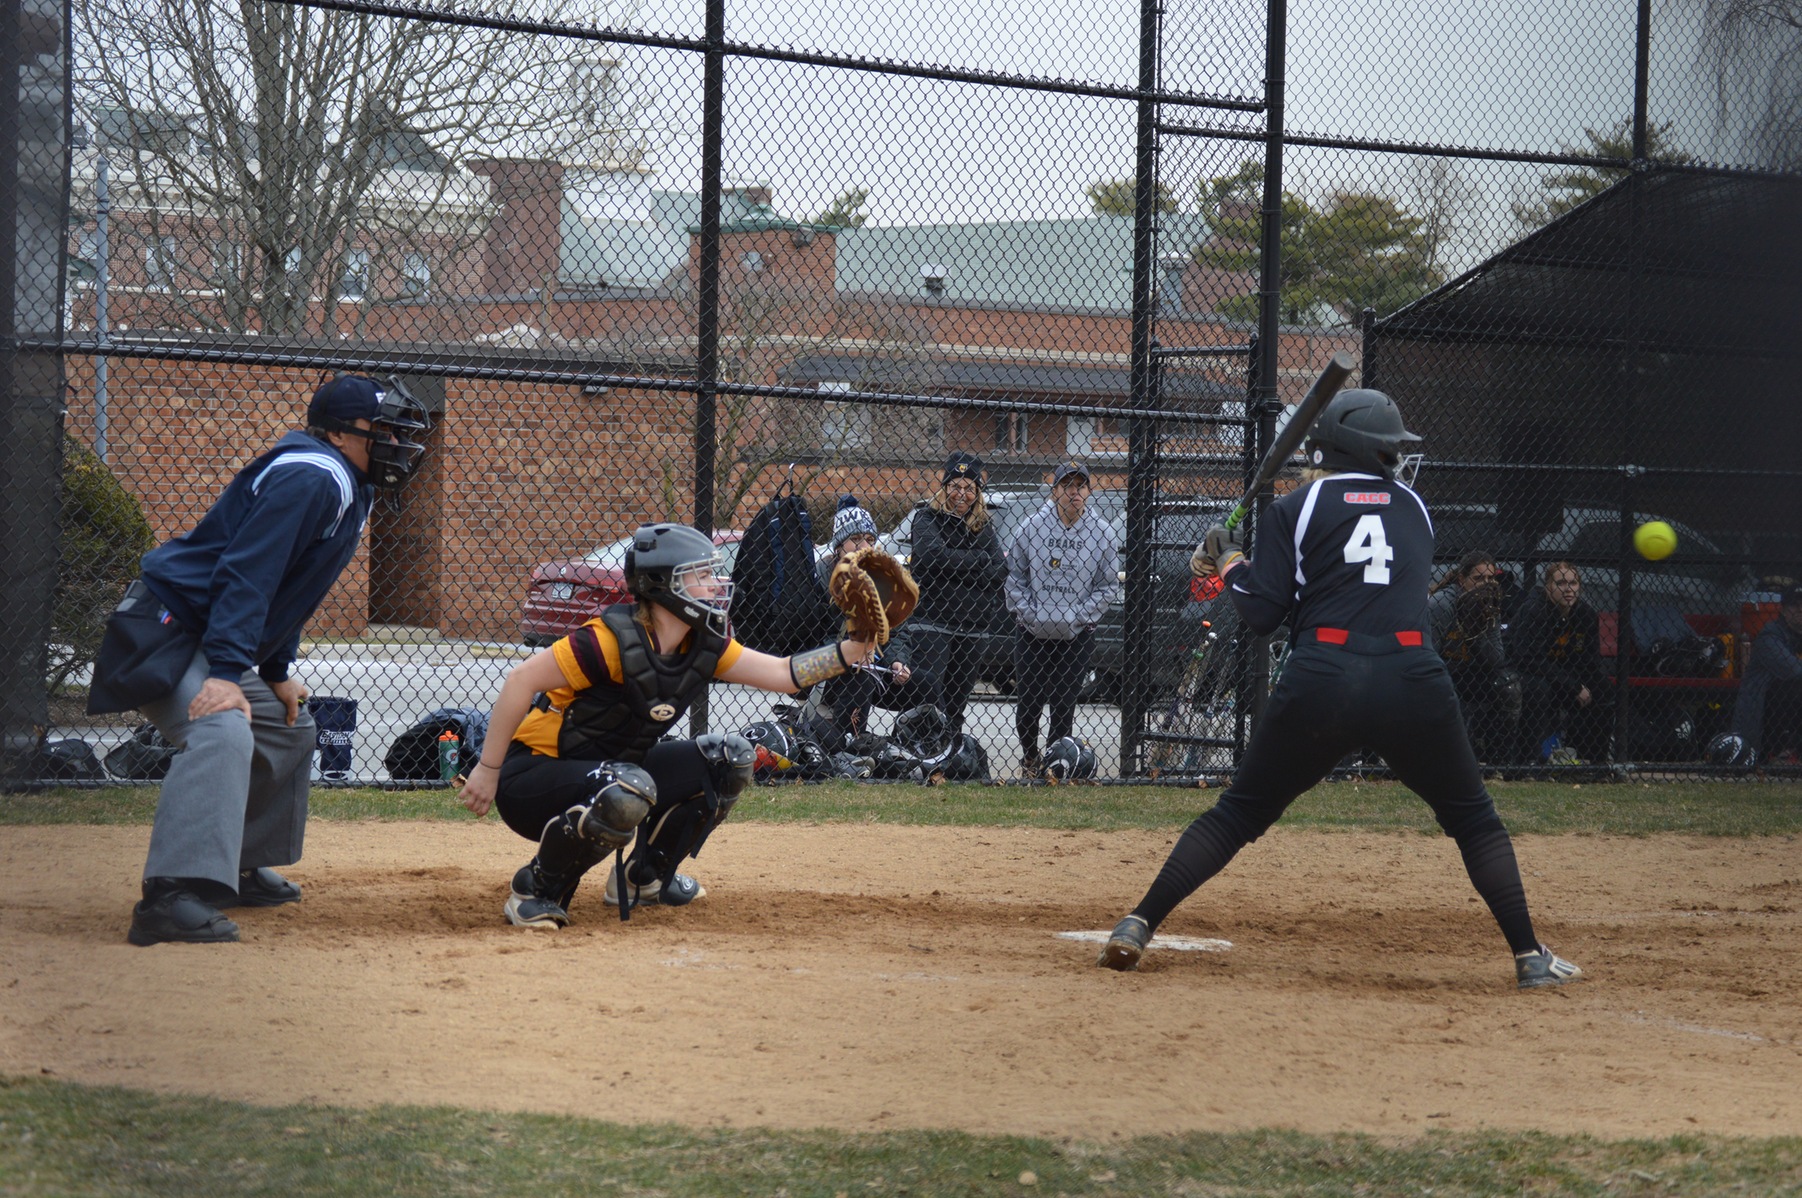 The Dominican College softball team swept Post University 13-8 and 4-2 this afternoon in CACC games.